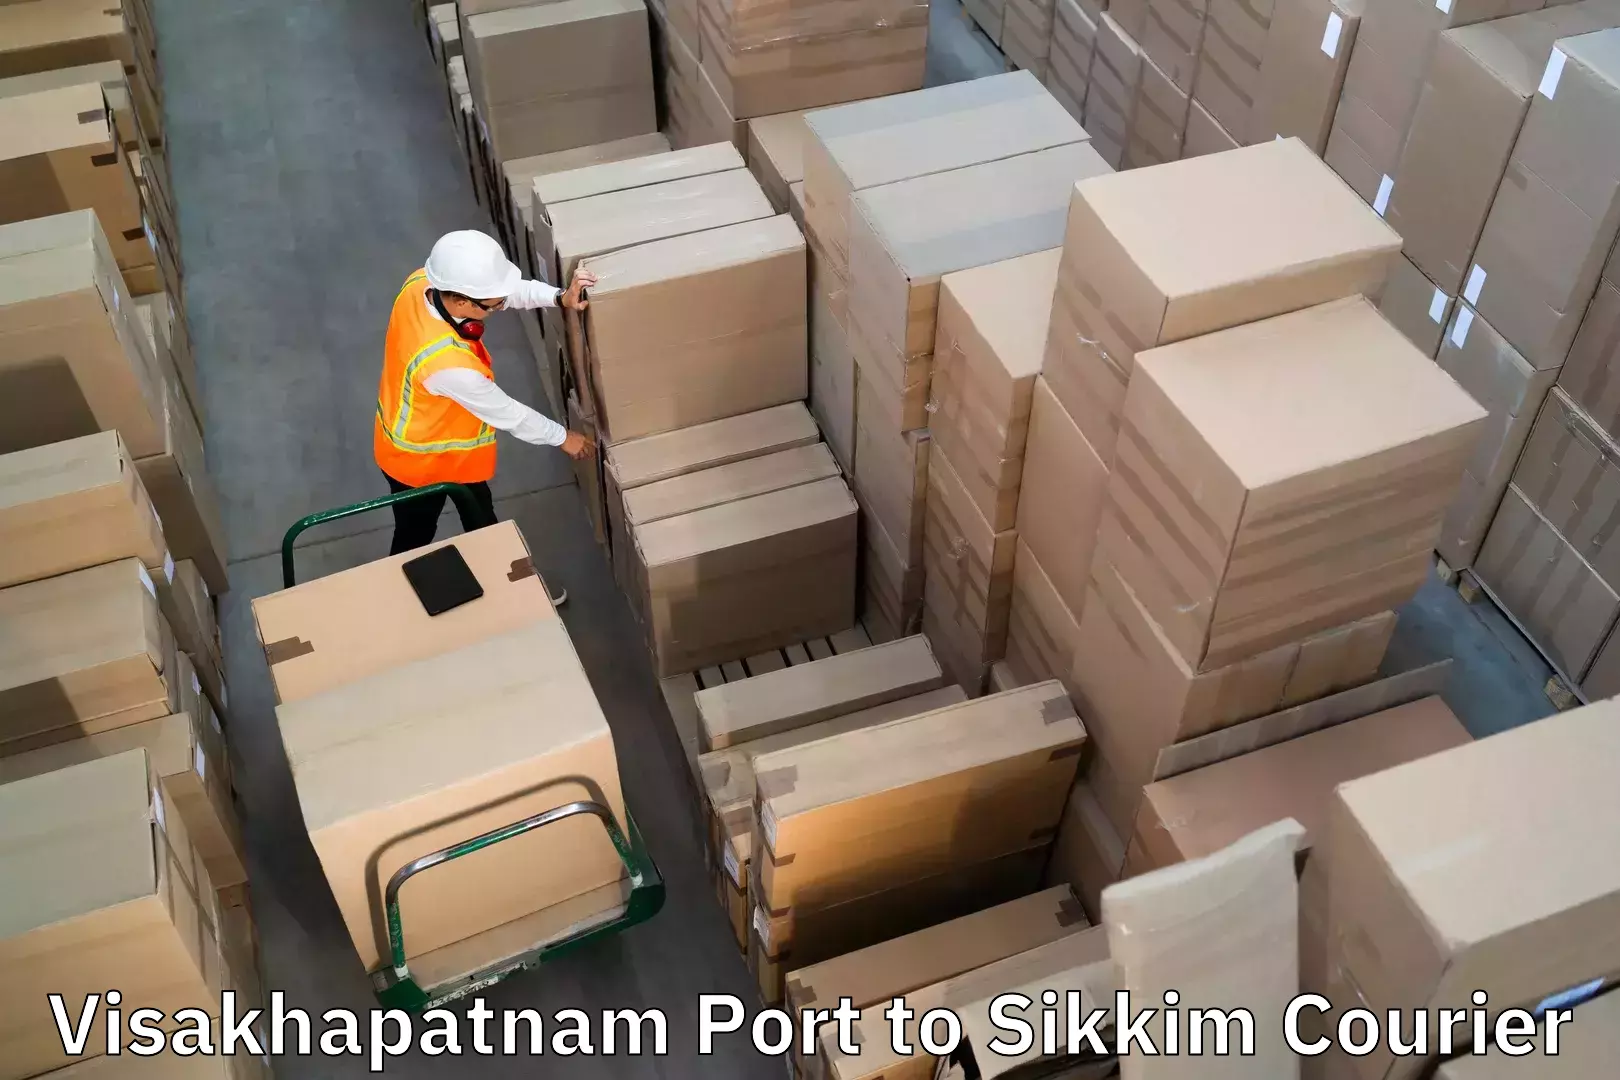 Luggage shipment specialists Visakhapatnam Port to Pelling